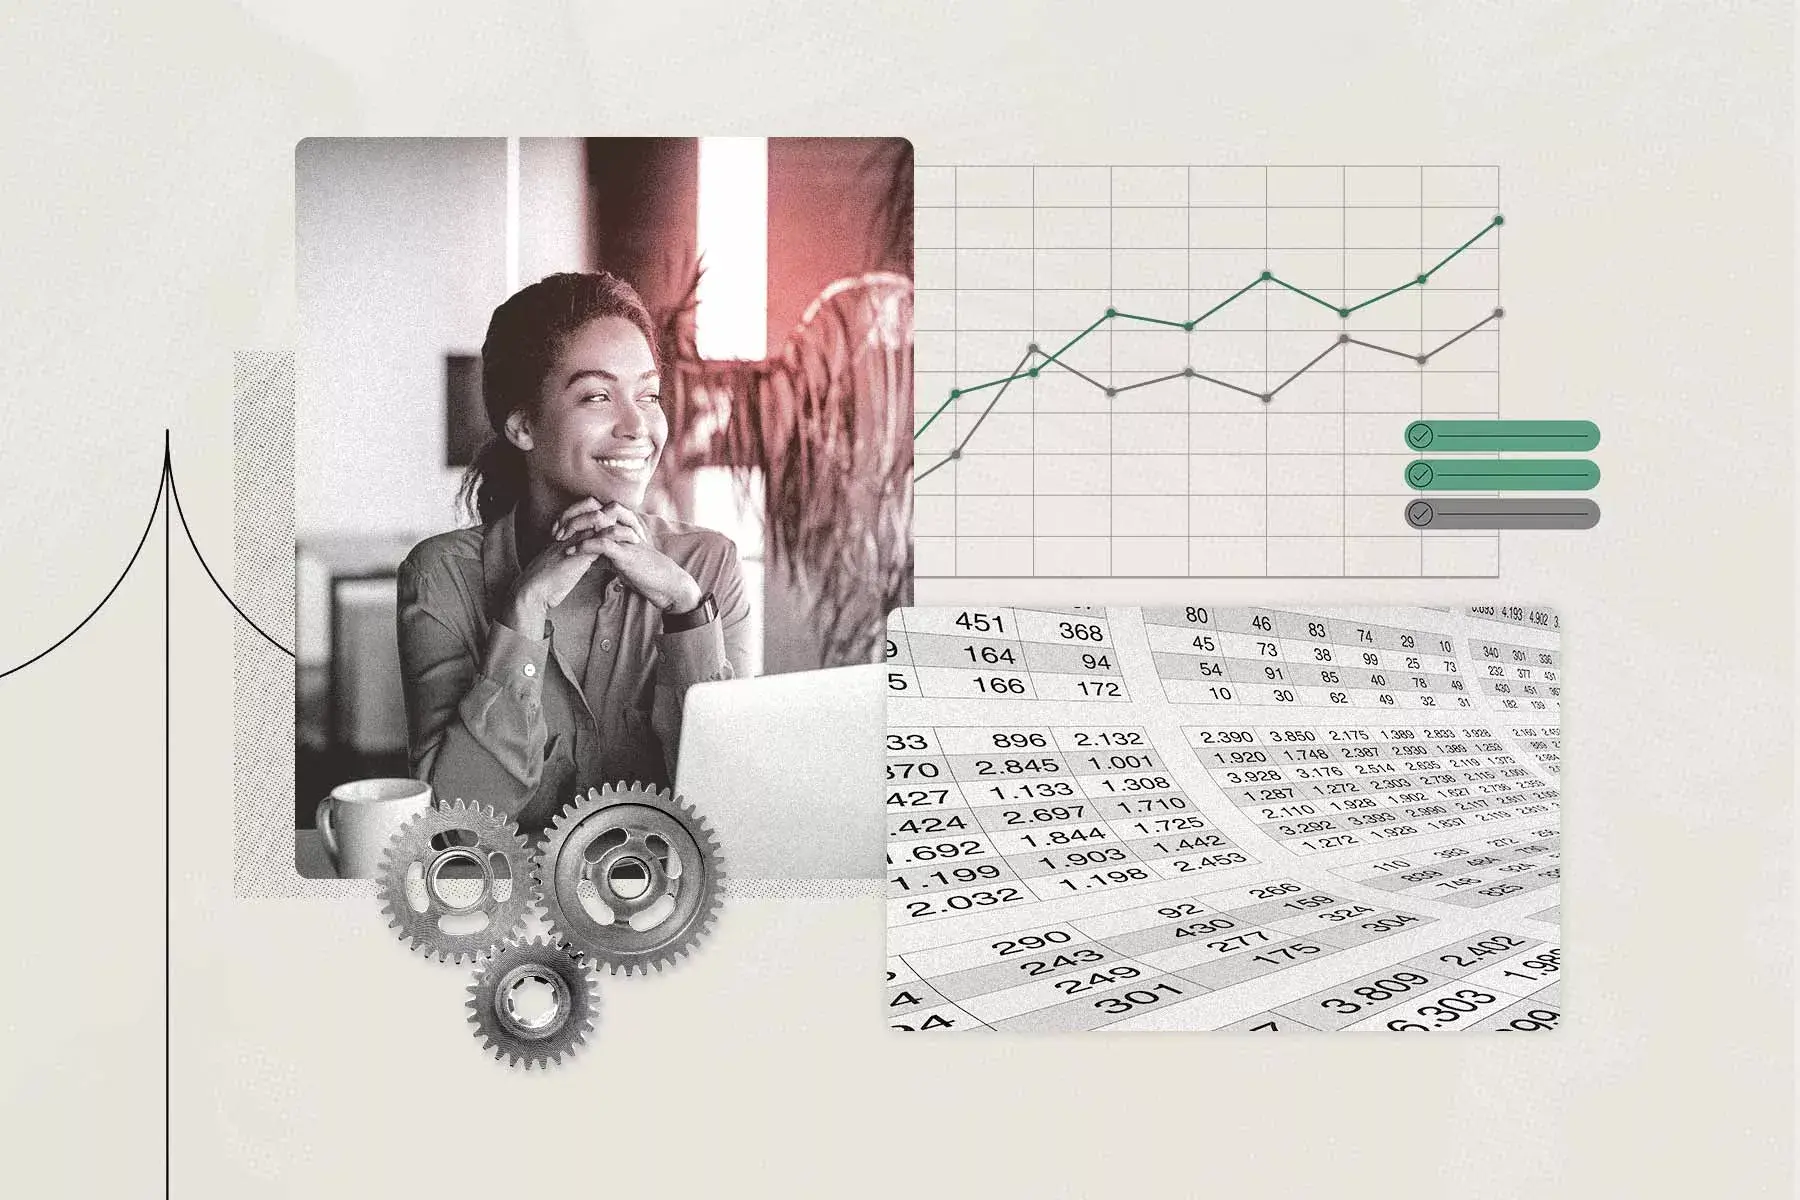 Banner image for an article on automating repetitive tasks. Features a woman in an office setting, a spreadsheet, and a graph showing an uptick.